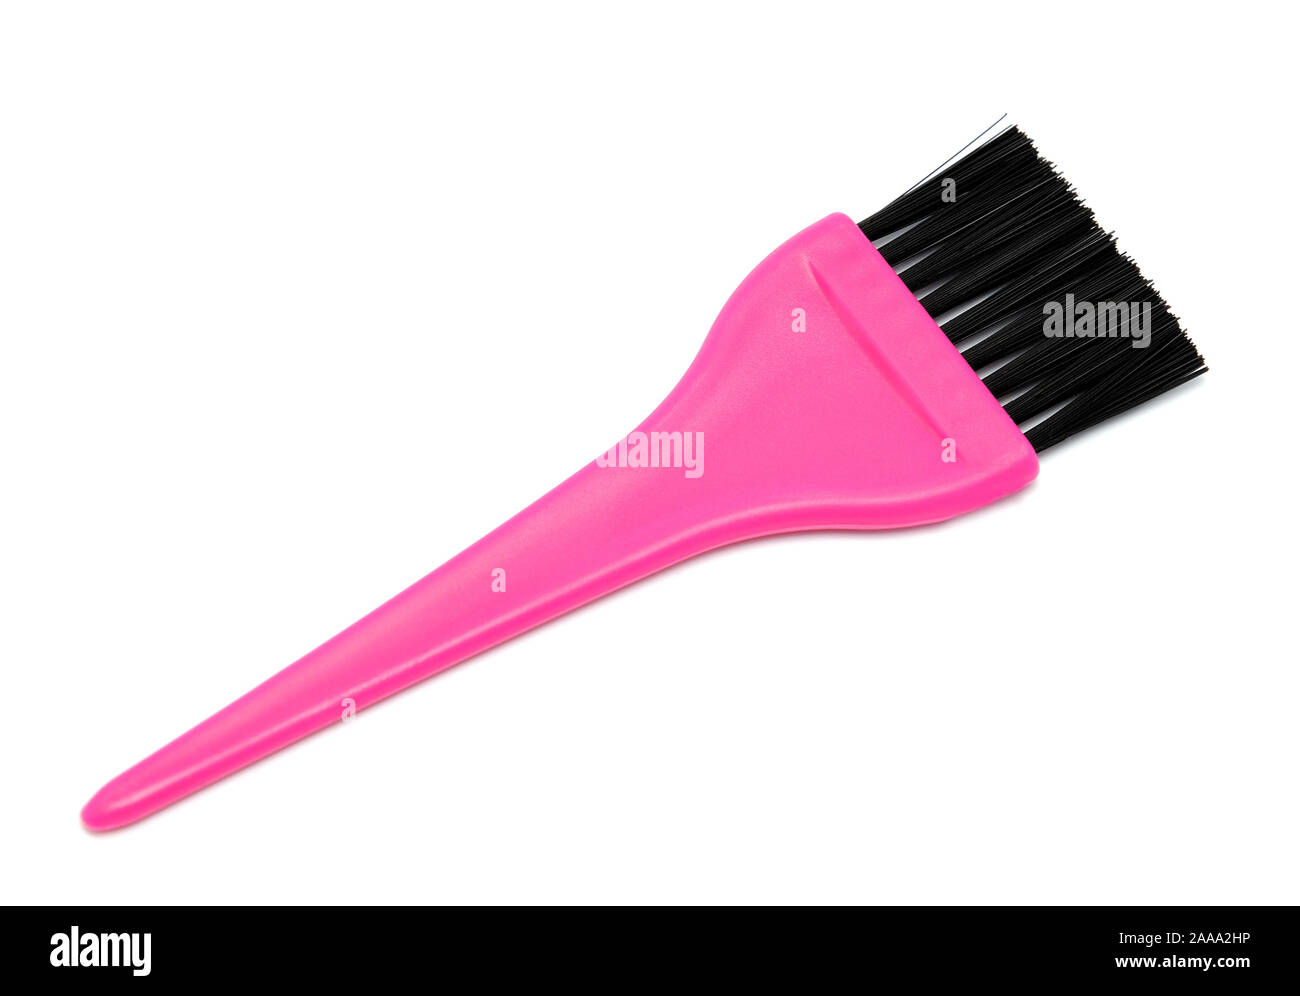 Brush for painting hair on a white background Stock Photo